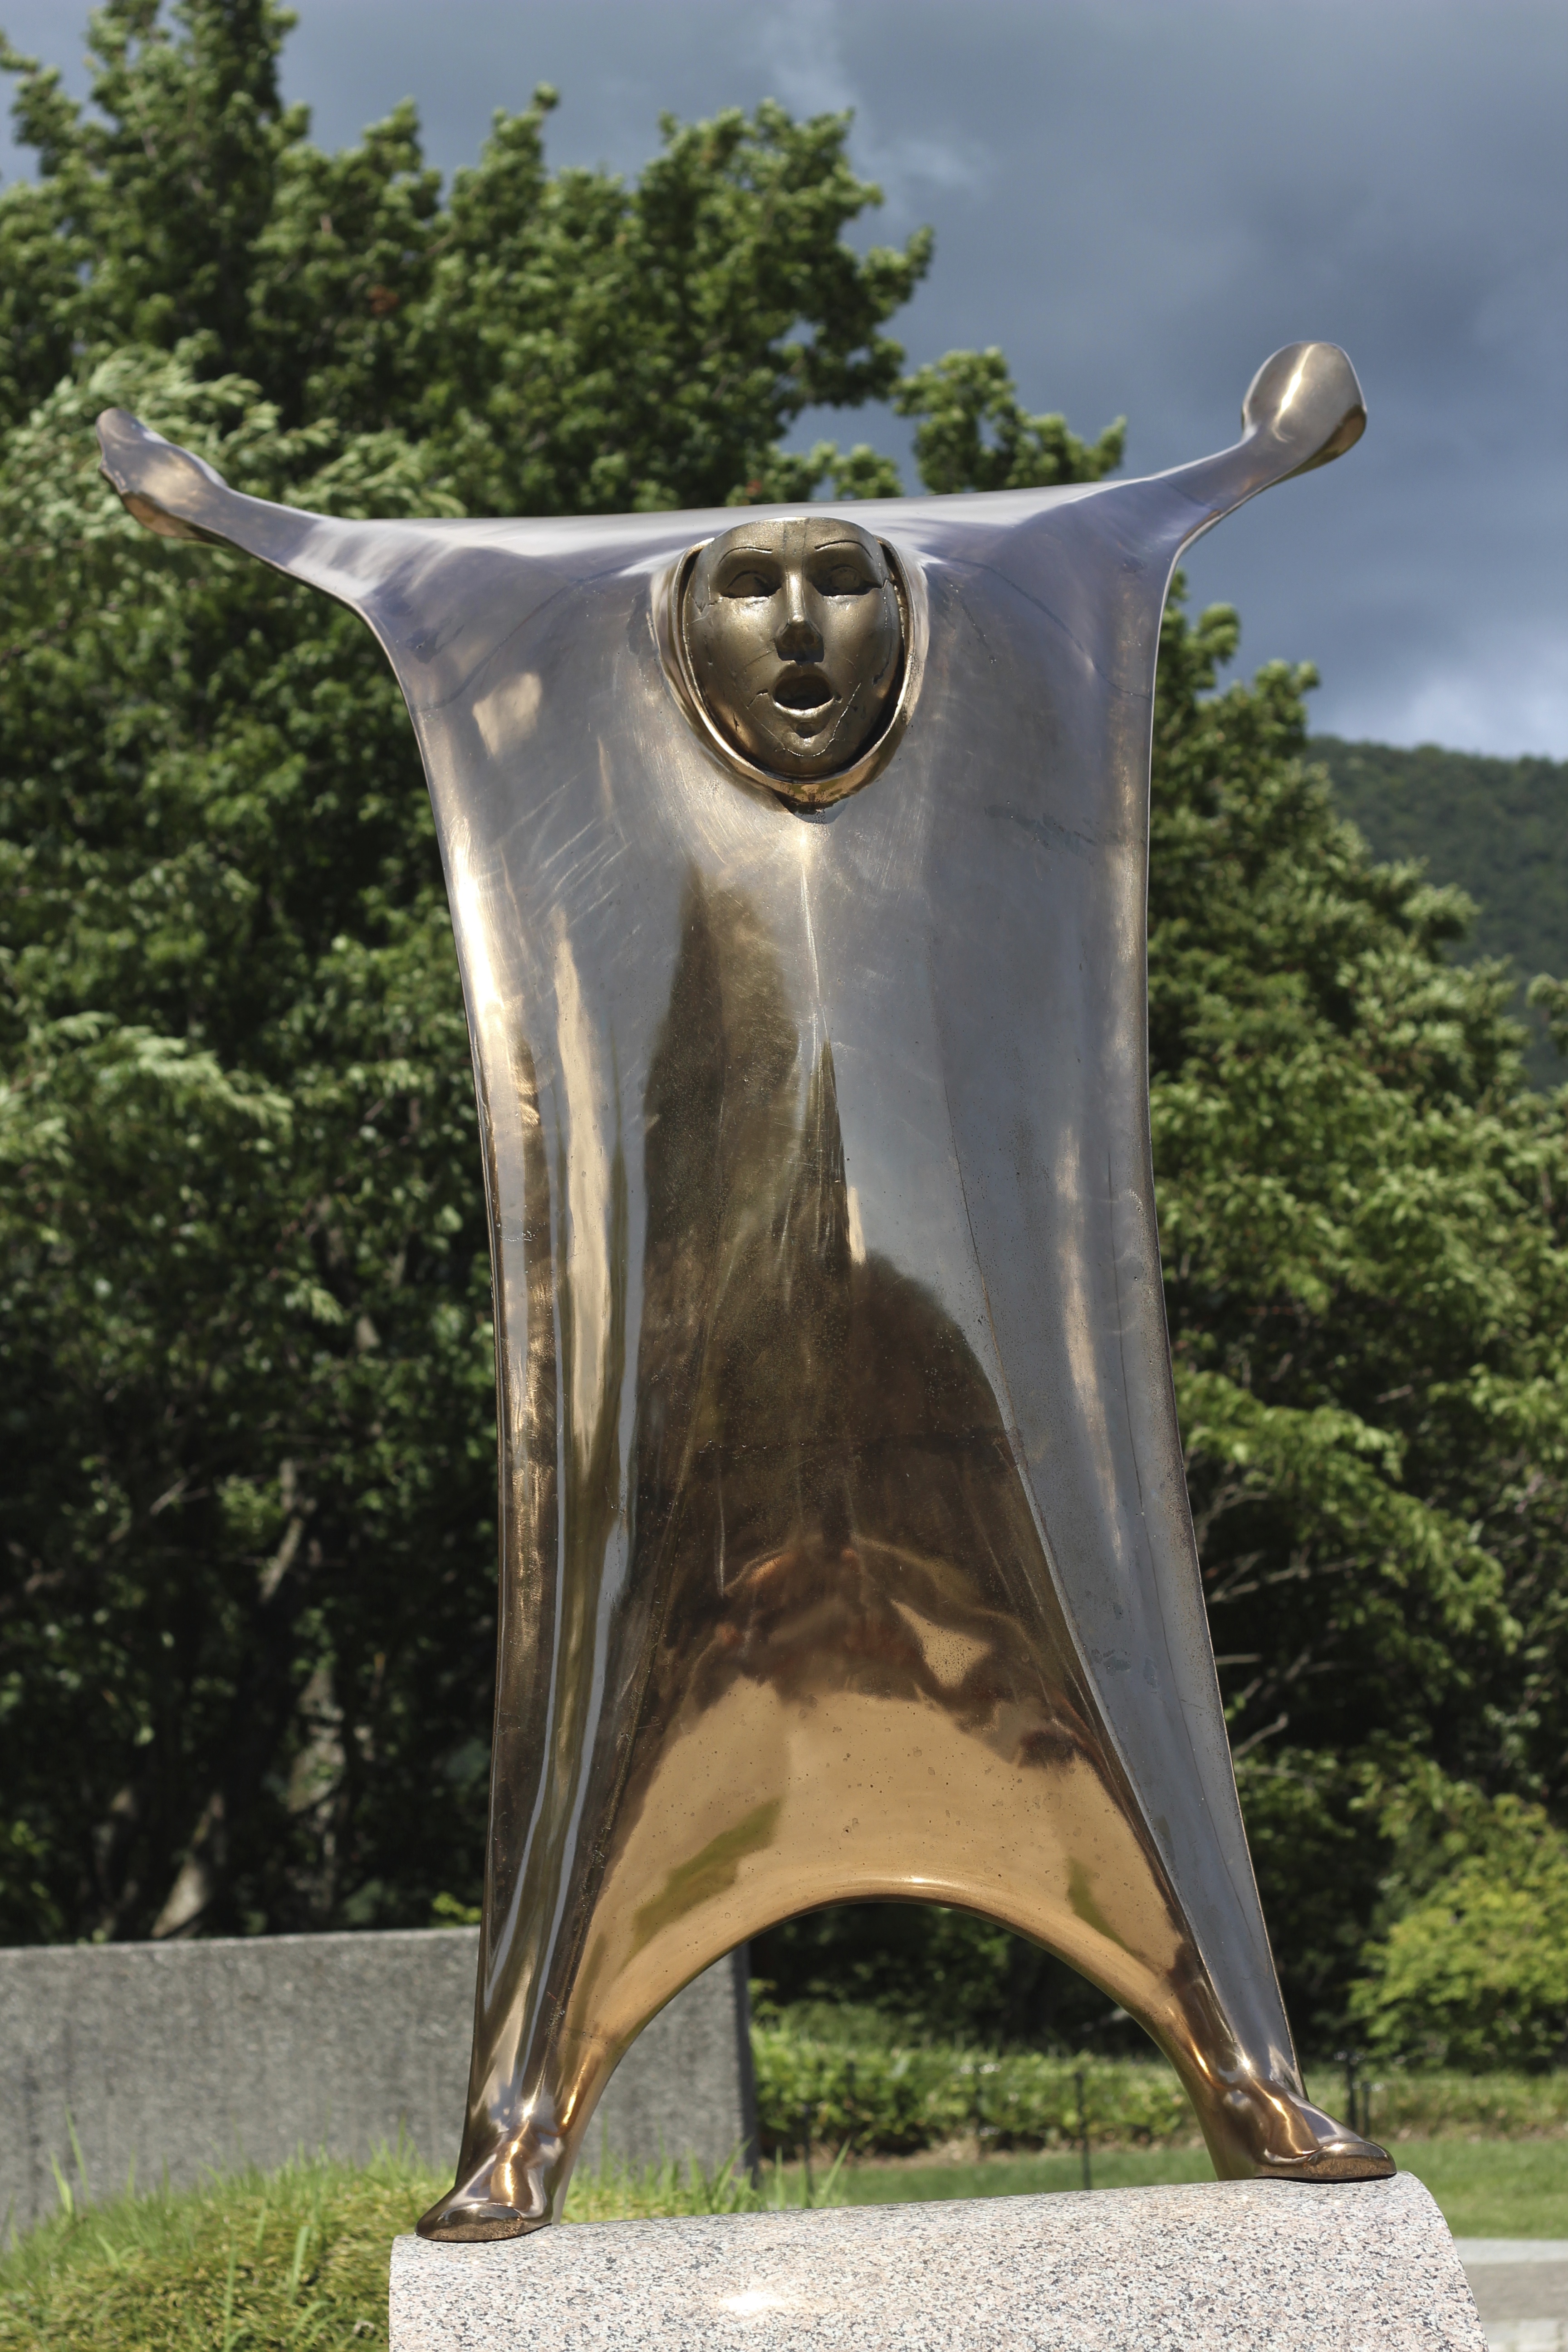 Hakone Open-Air Museum Offers Unique Experience of the Region